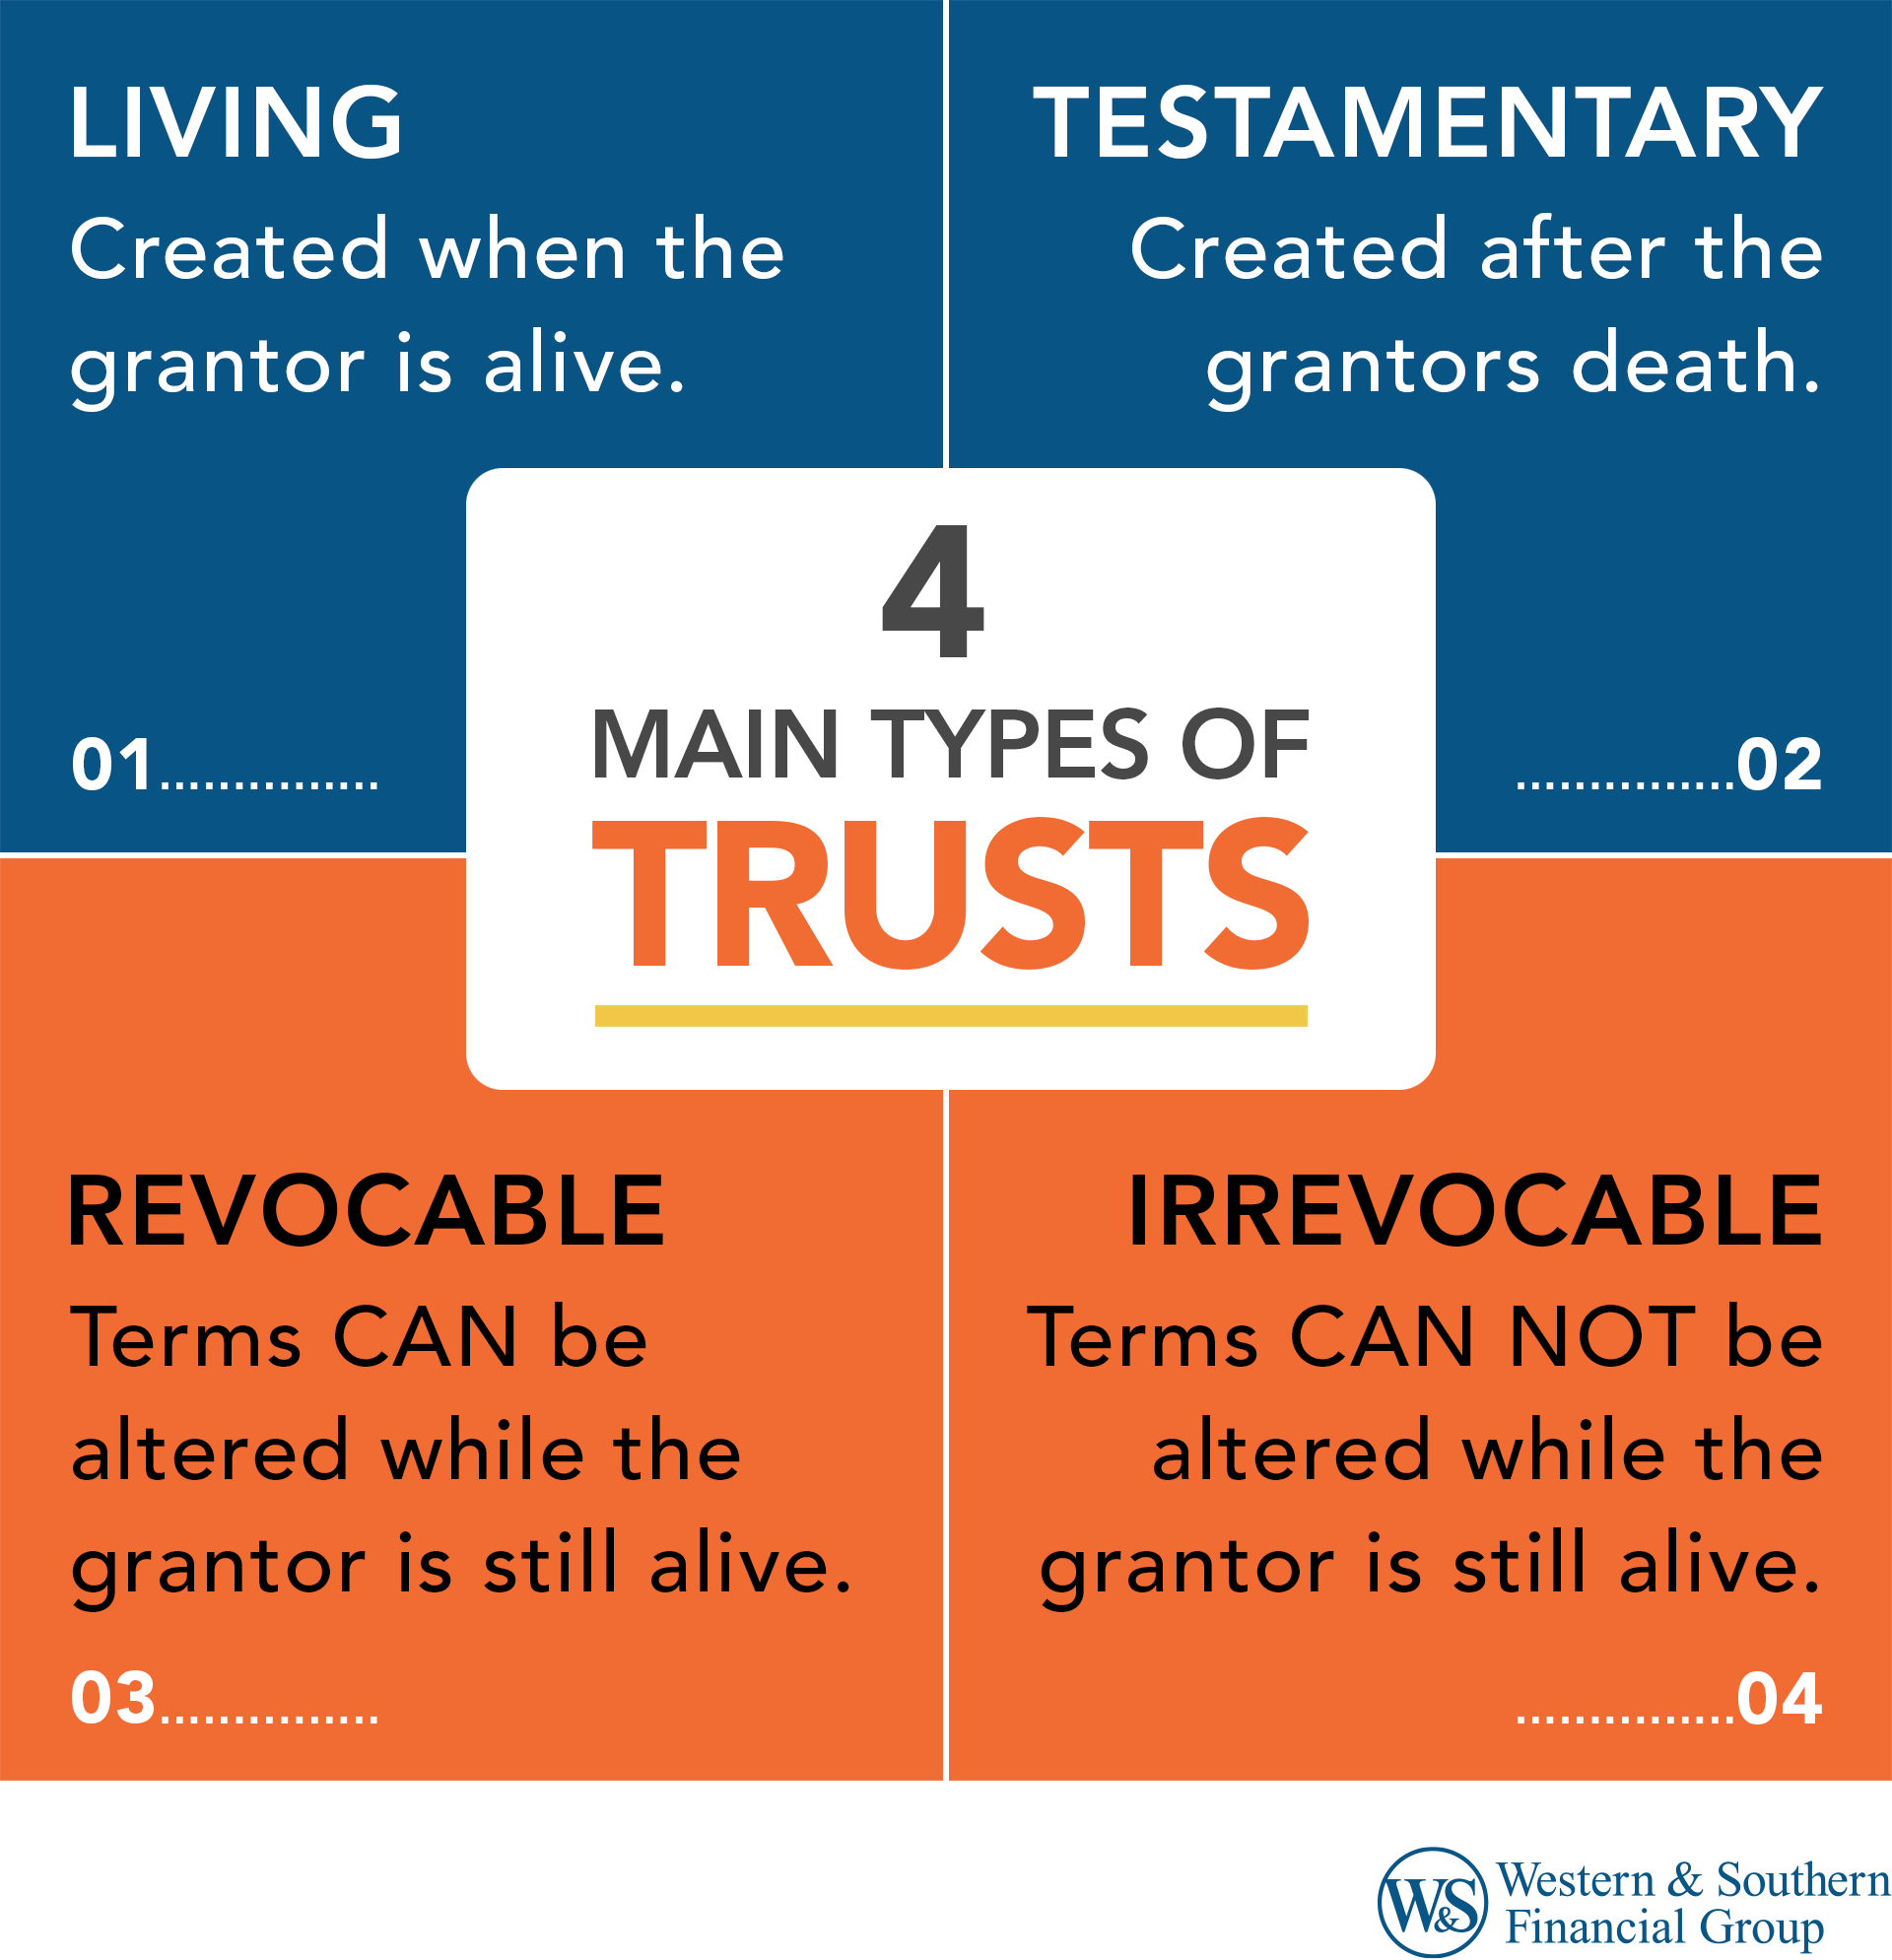 Different Types of Trusts: Living Trusts, Testamentary Trusts, Revocable Trusts, and Irrevocable Trusts.